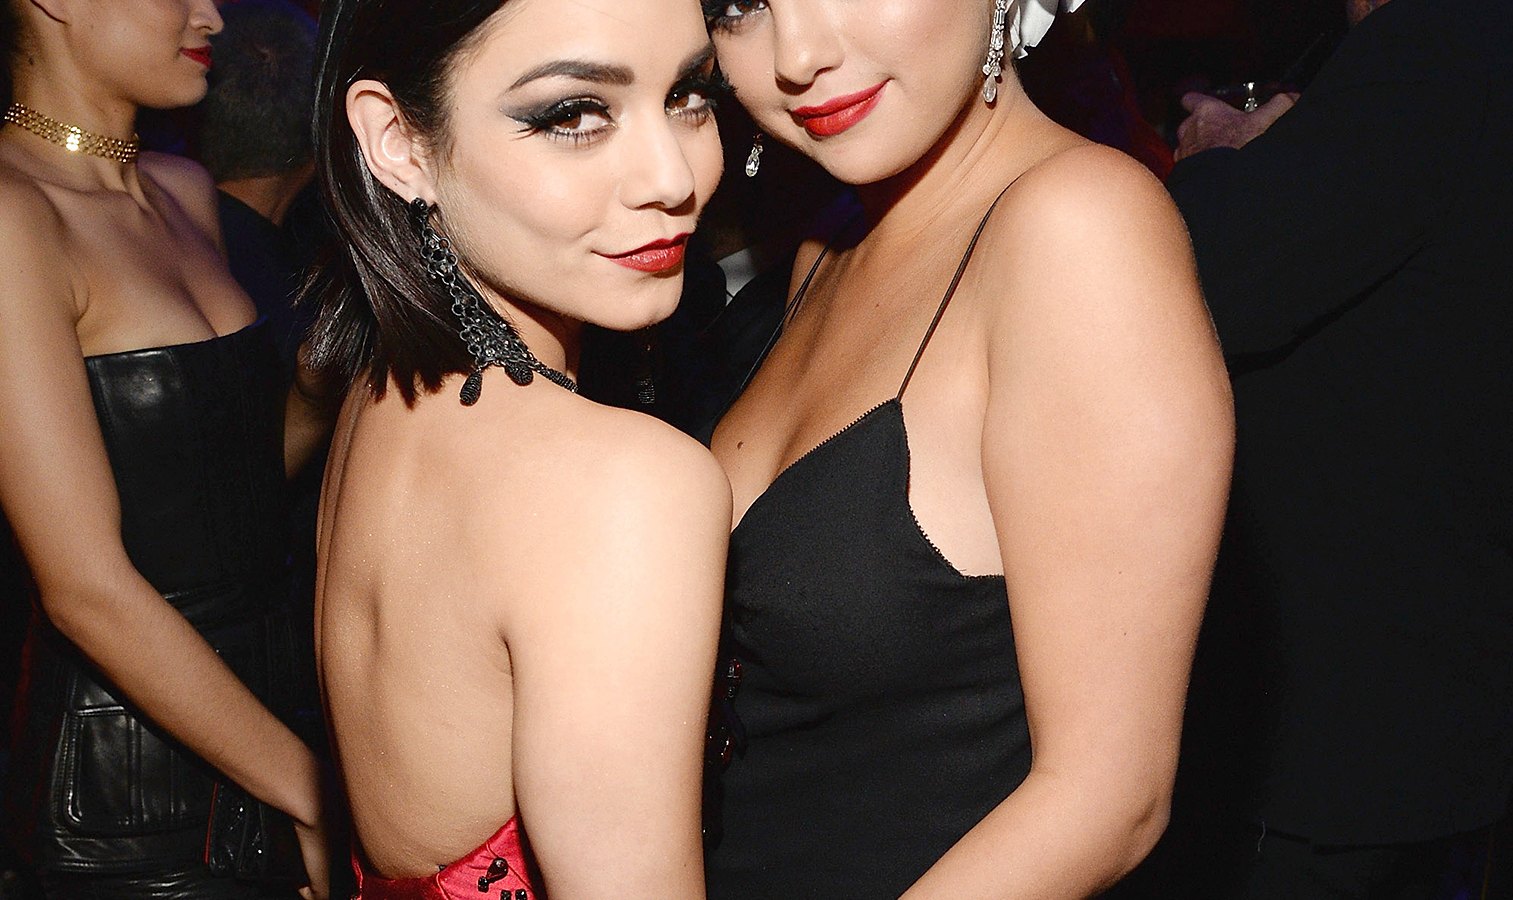 Vanessa Hudgens and Selena Gomez at the Met Gala afterparty